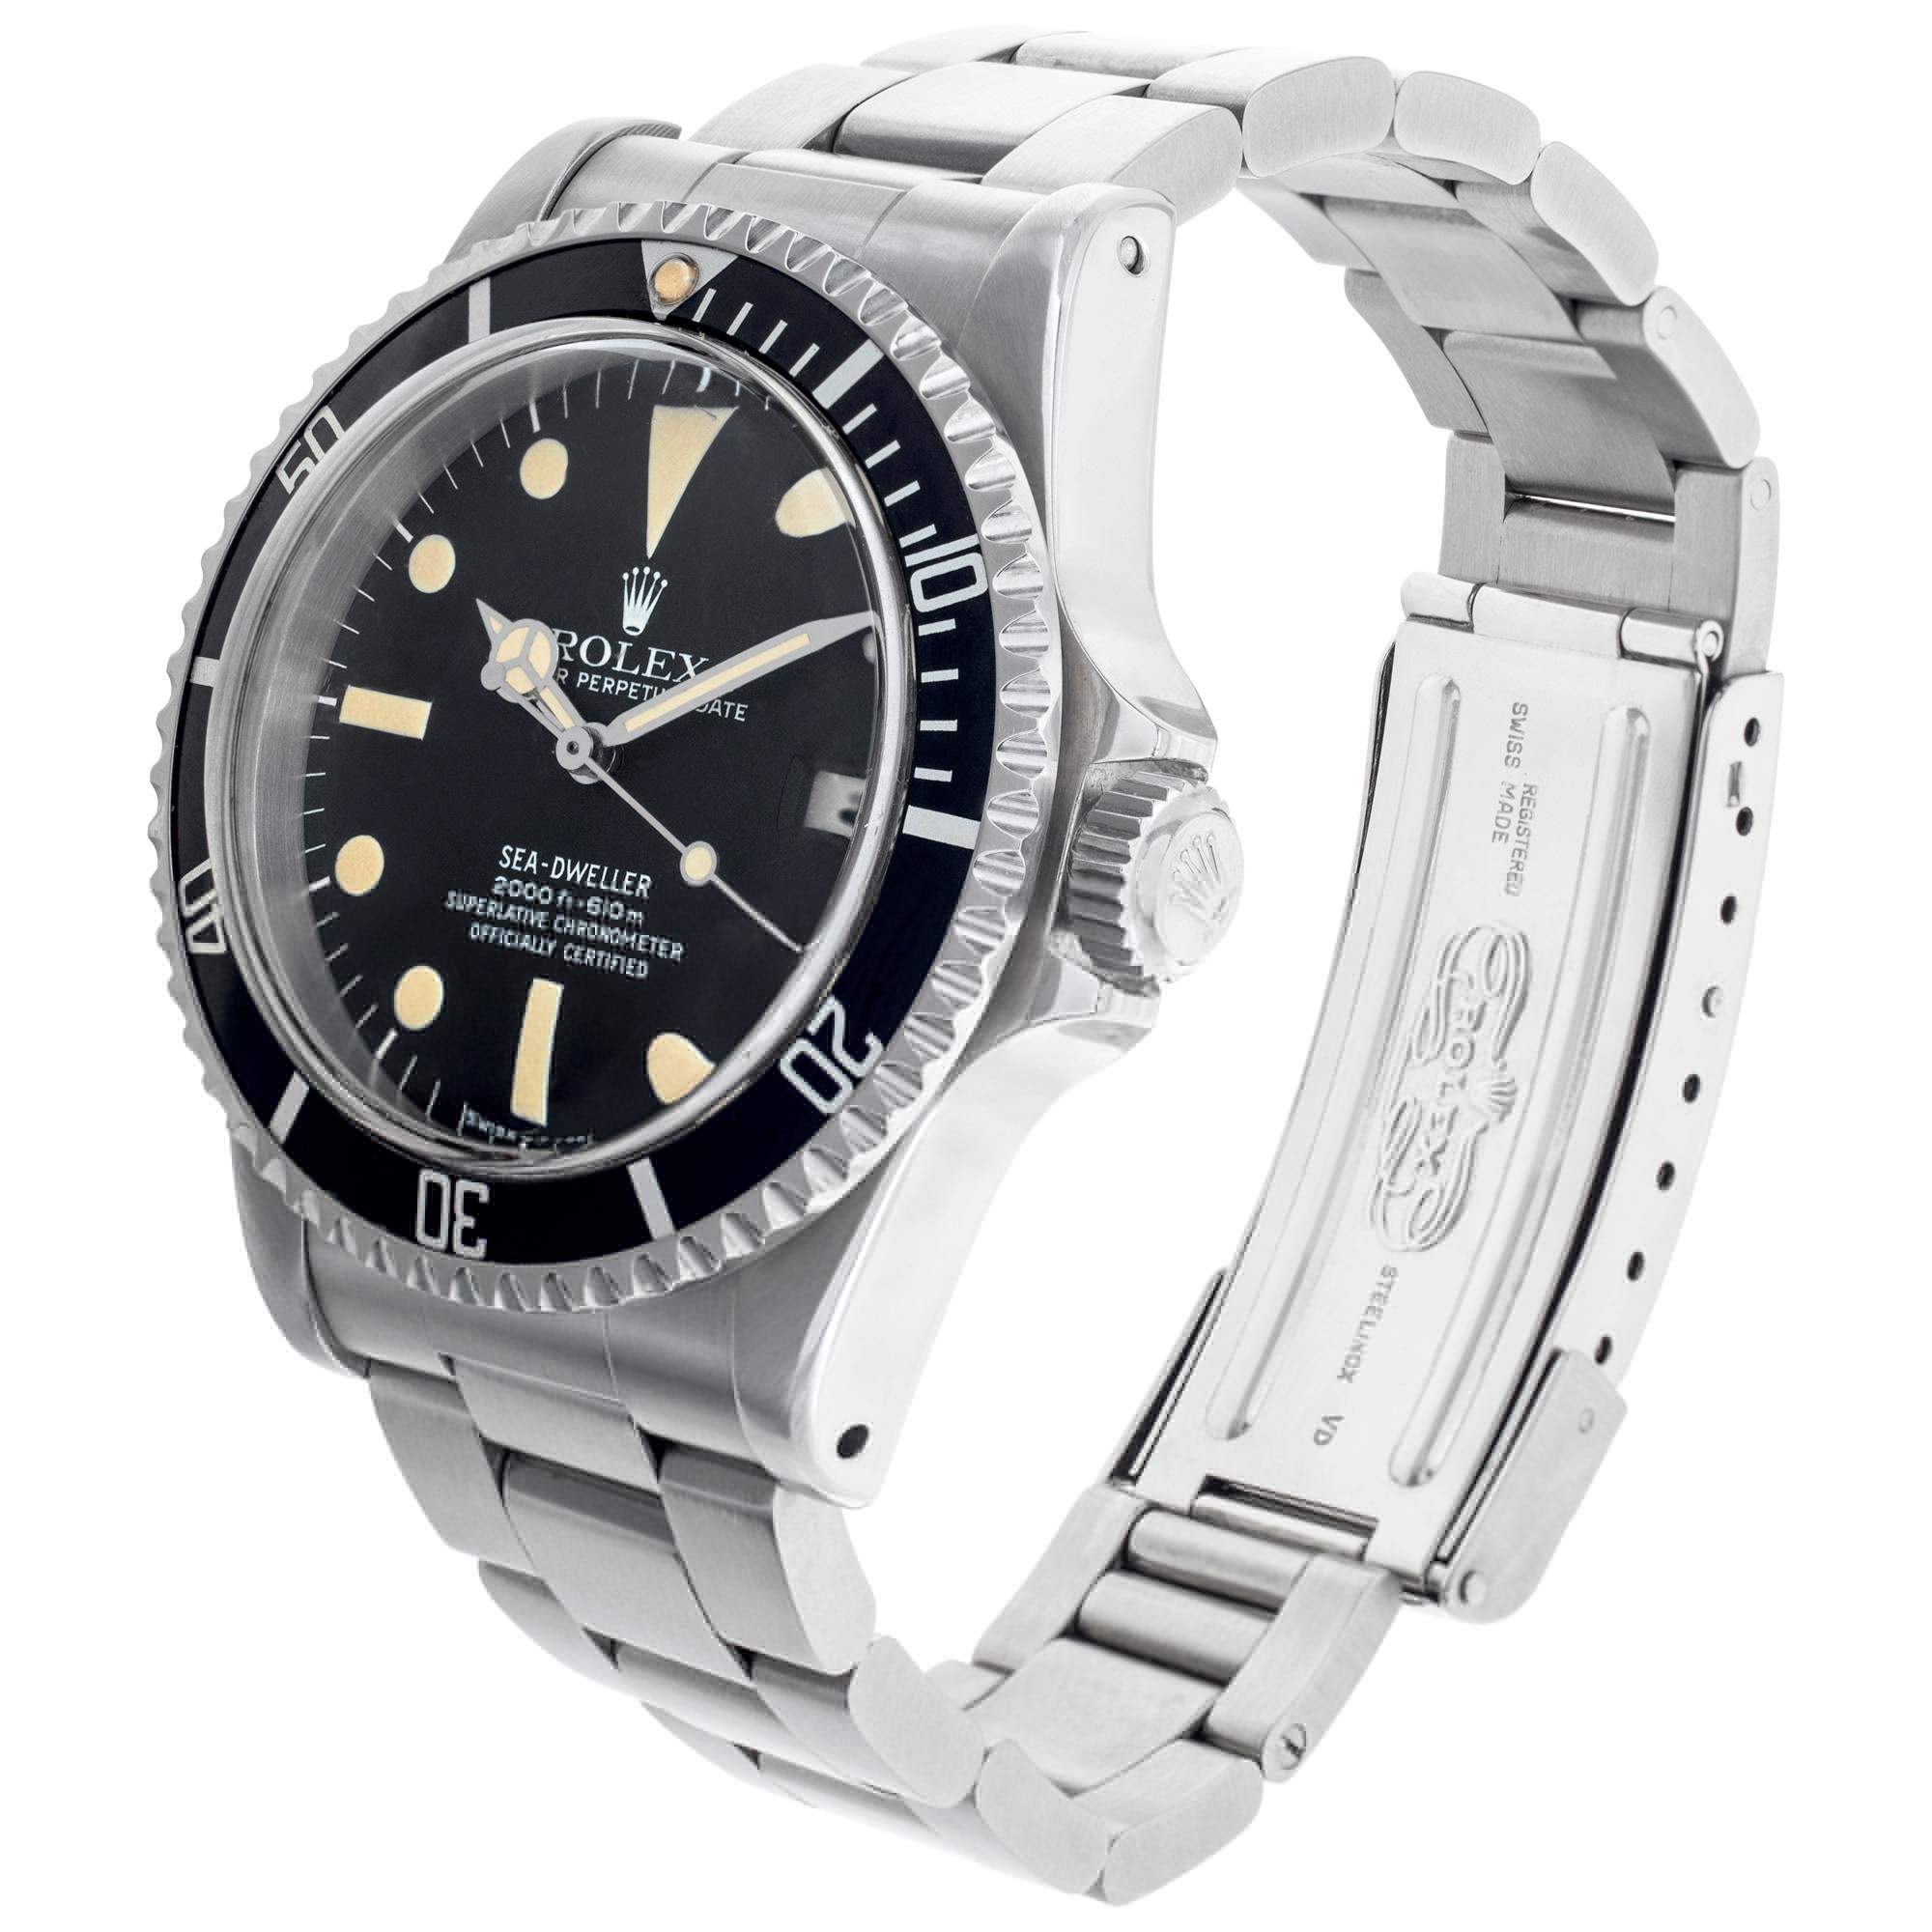 Vintage Rolex Sea-Dweller with Mark 1 dial in stainless steel. Nice patina on the original hands and dial. Auto w/ sweep seconds and date. 40 mm case size. Circa 1979. Ref 1665. **Bank Wire Only at this Price** Fine Pre-owned Rolex Watch. Certified